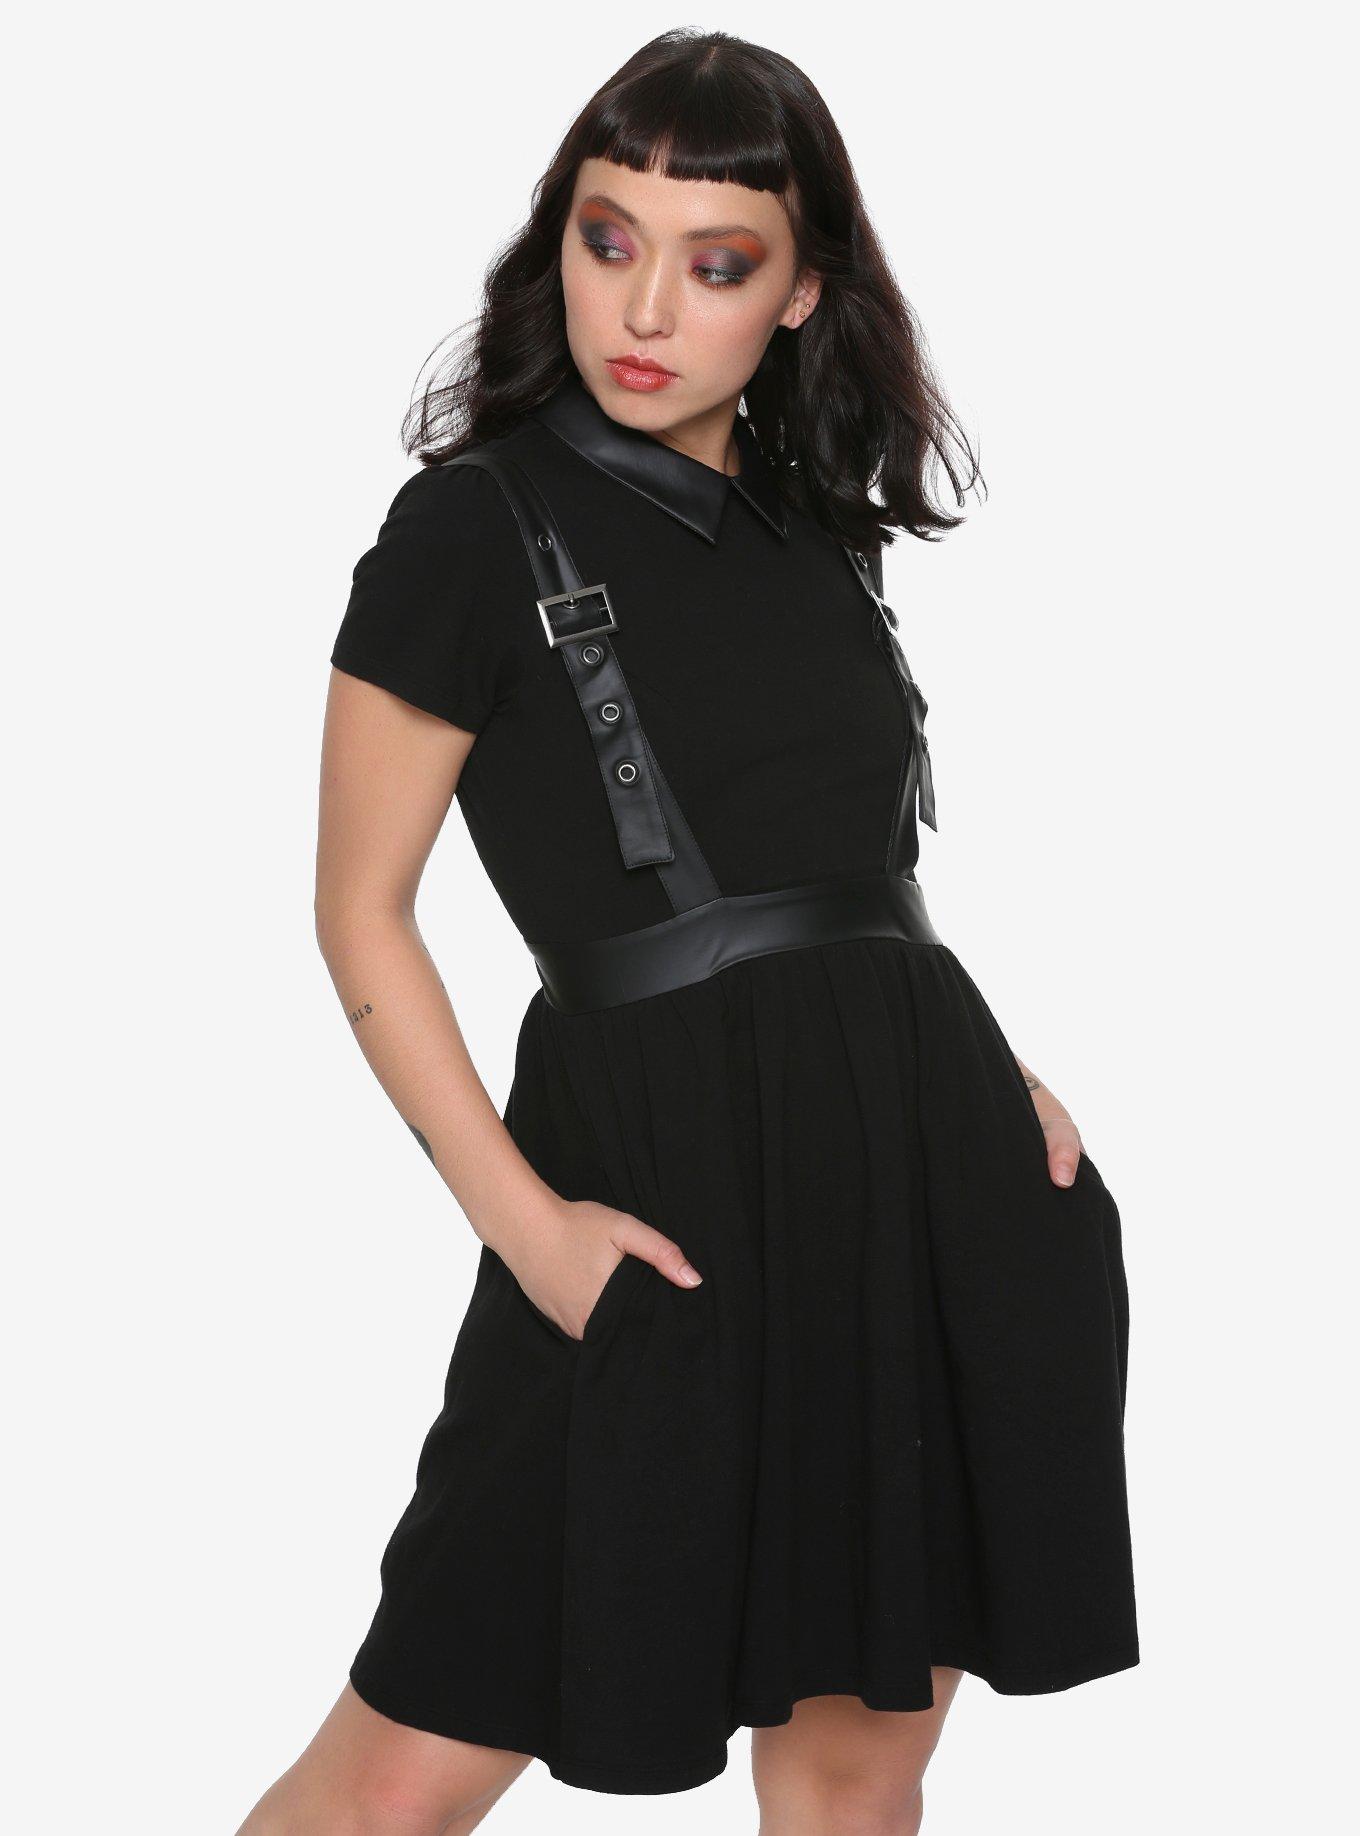 Harness black dress with basquine, leather straps, o-rings, witch